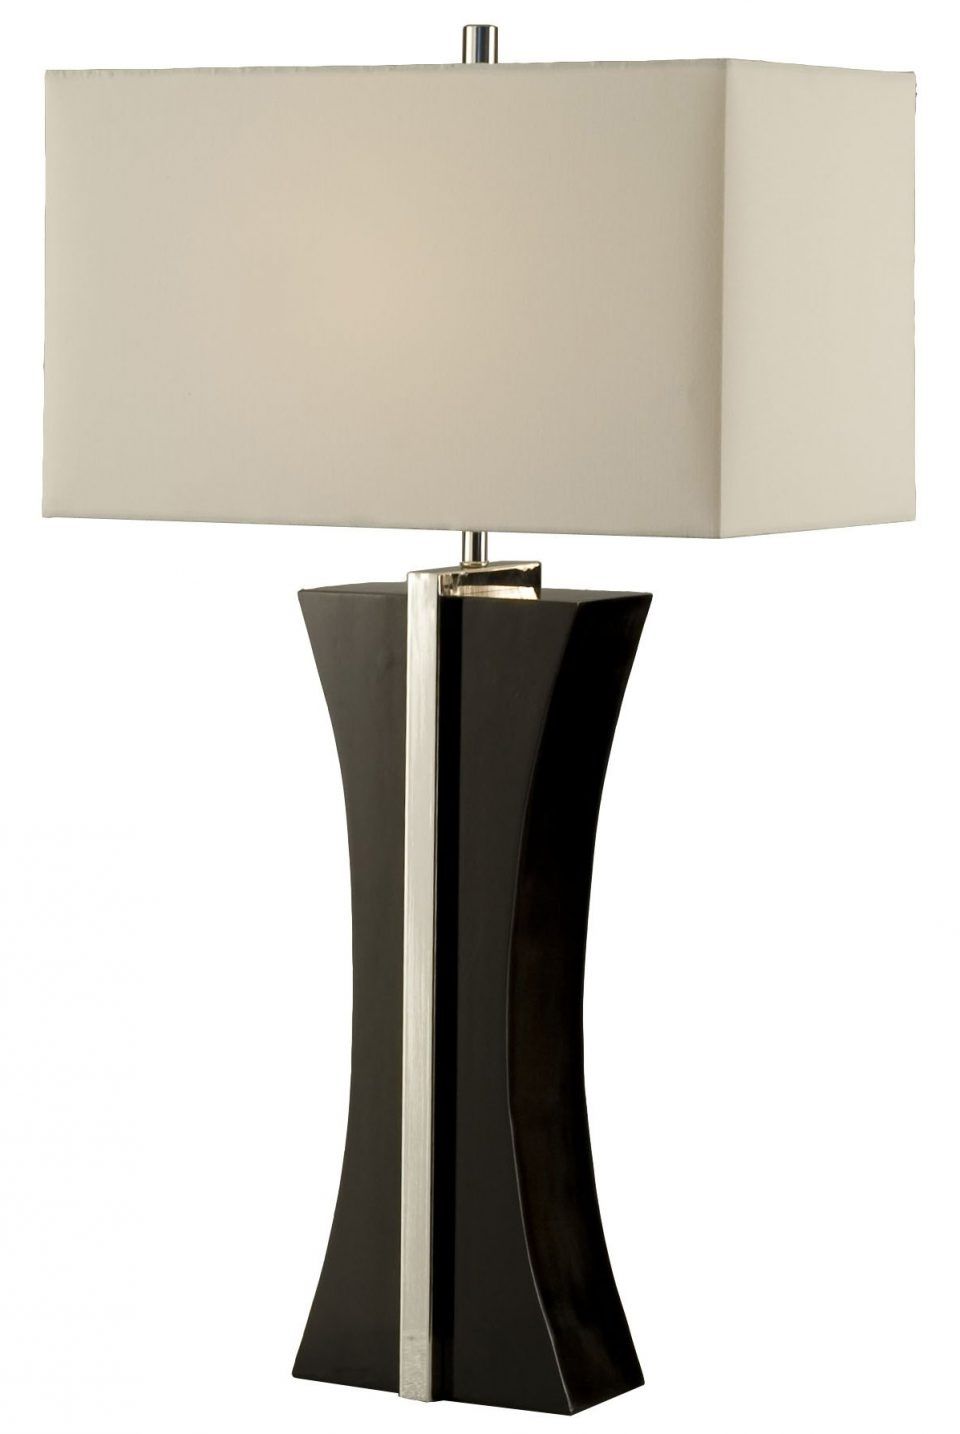 Light : Table Lamps For Bedroom Pole Floor Reading Lamp Design For Recent Living Room Table Reading Lamps (View 7 of 15)